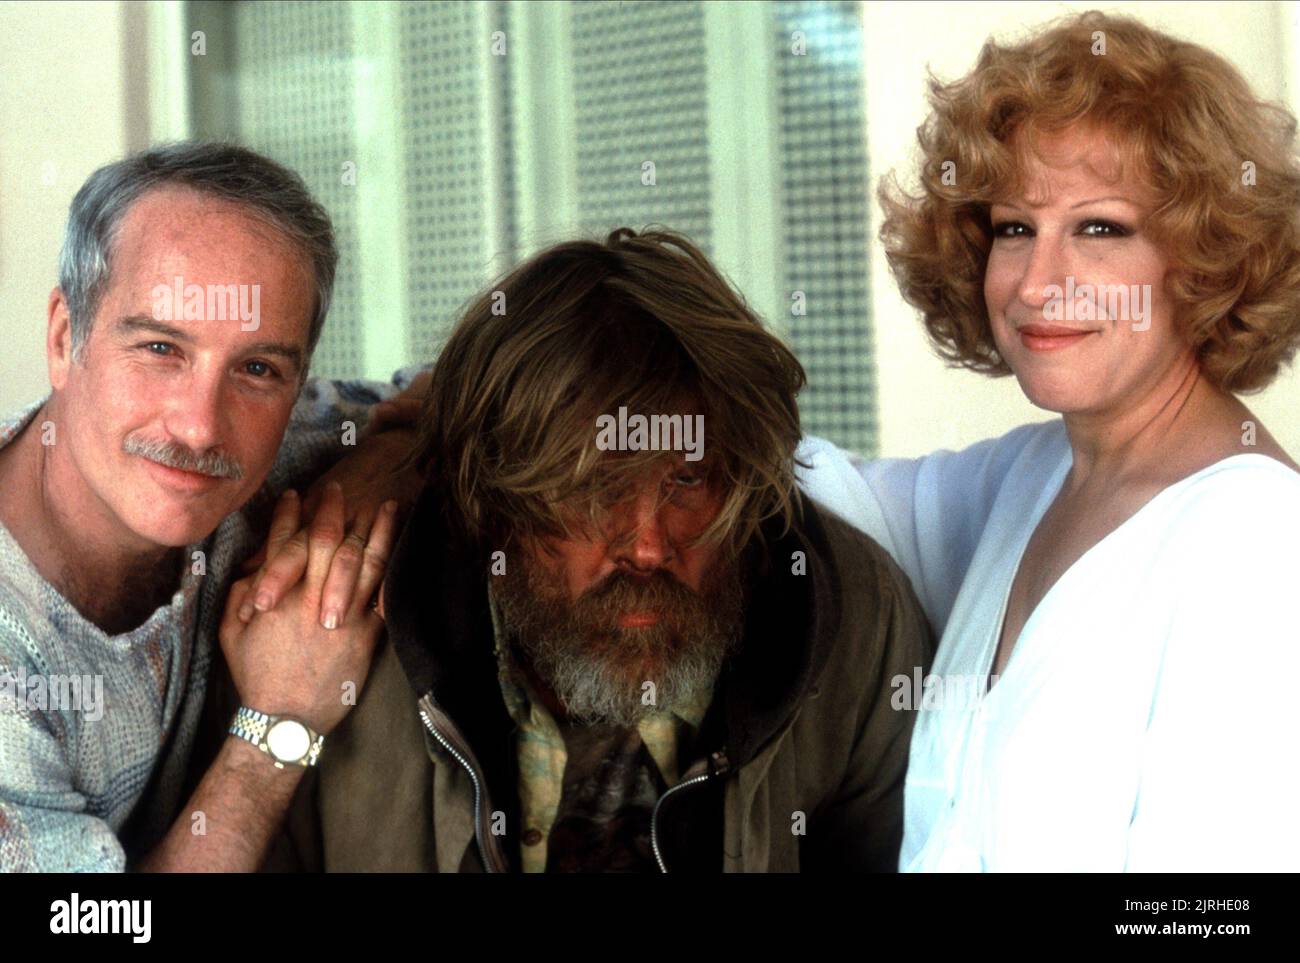 RICHARD DREYFUSS, NICK NOLTE, BETTE MIDLER, DOWN AND OUT IN BEVERLY HILLS, 1986 Stock Photo